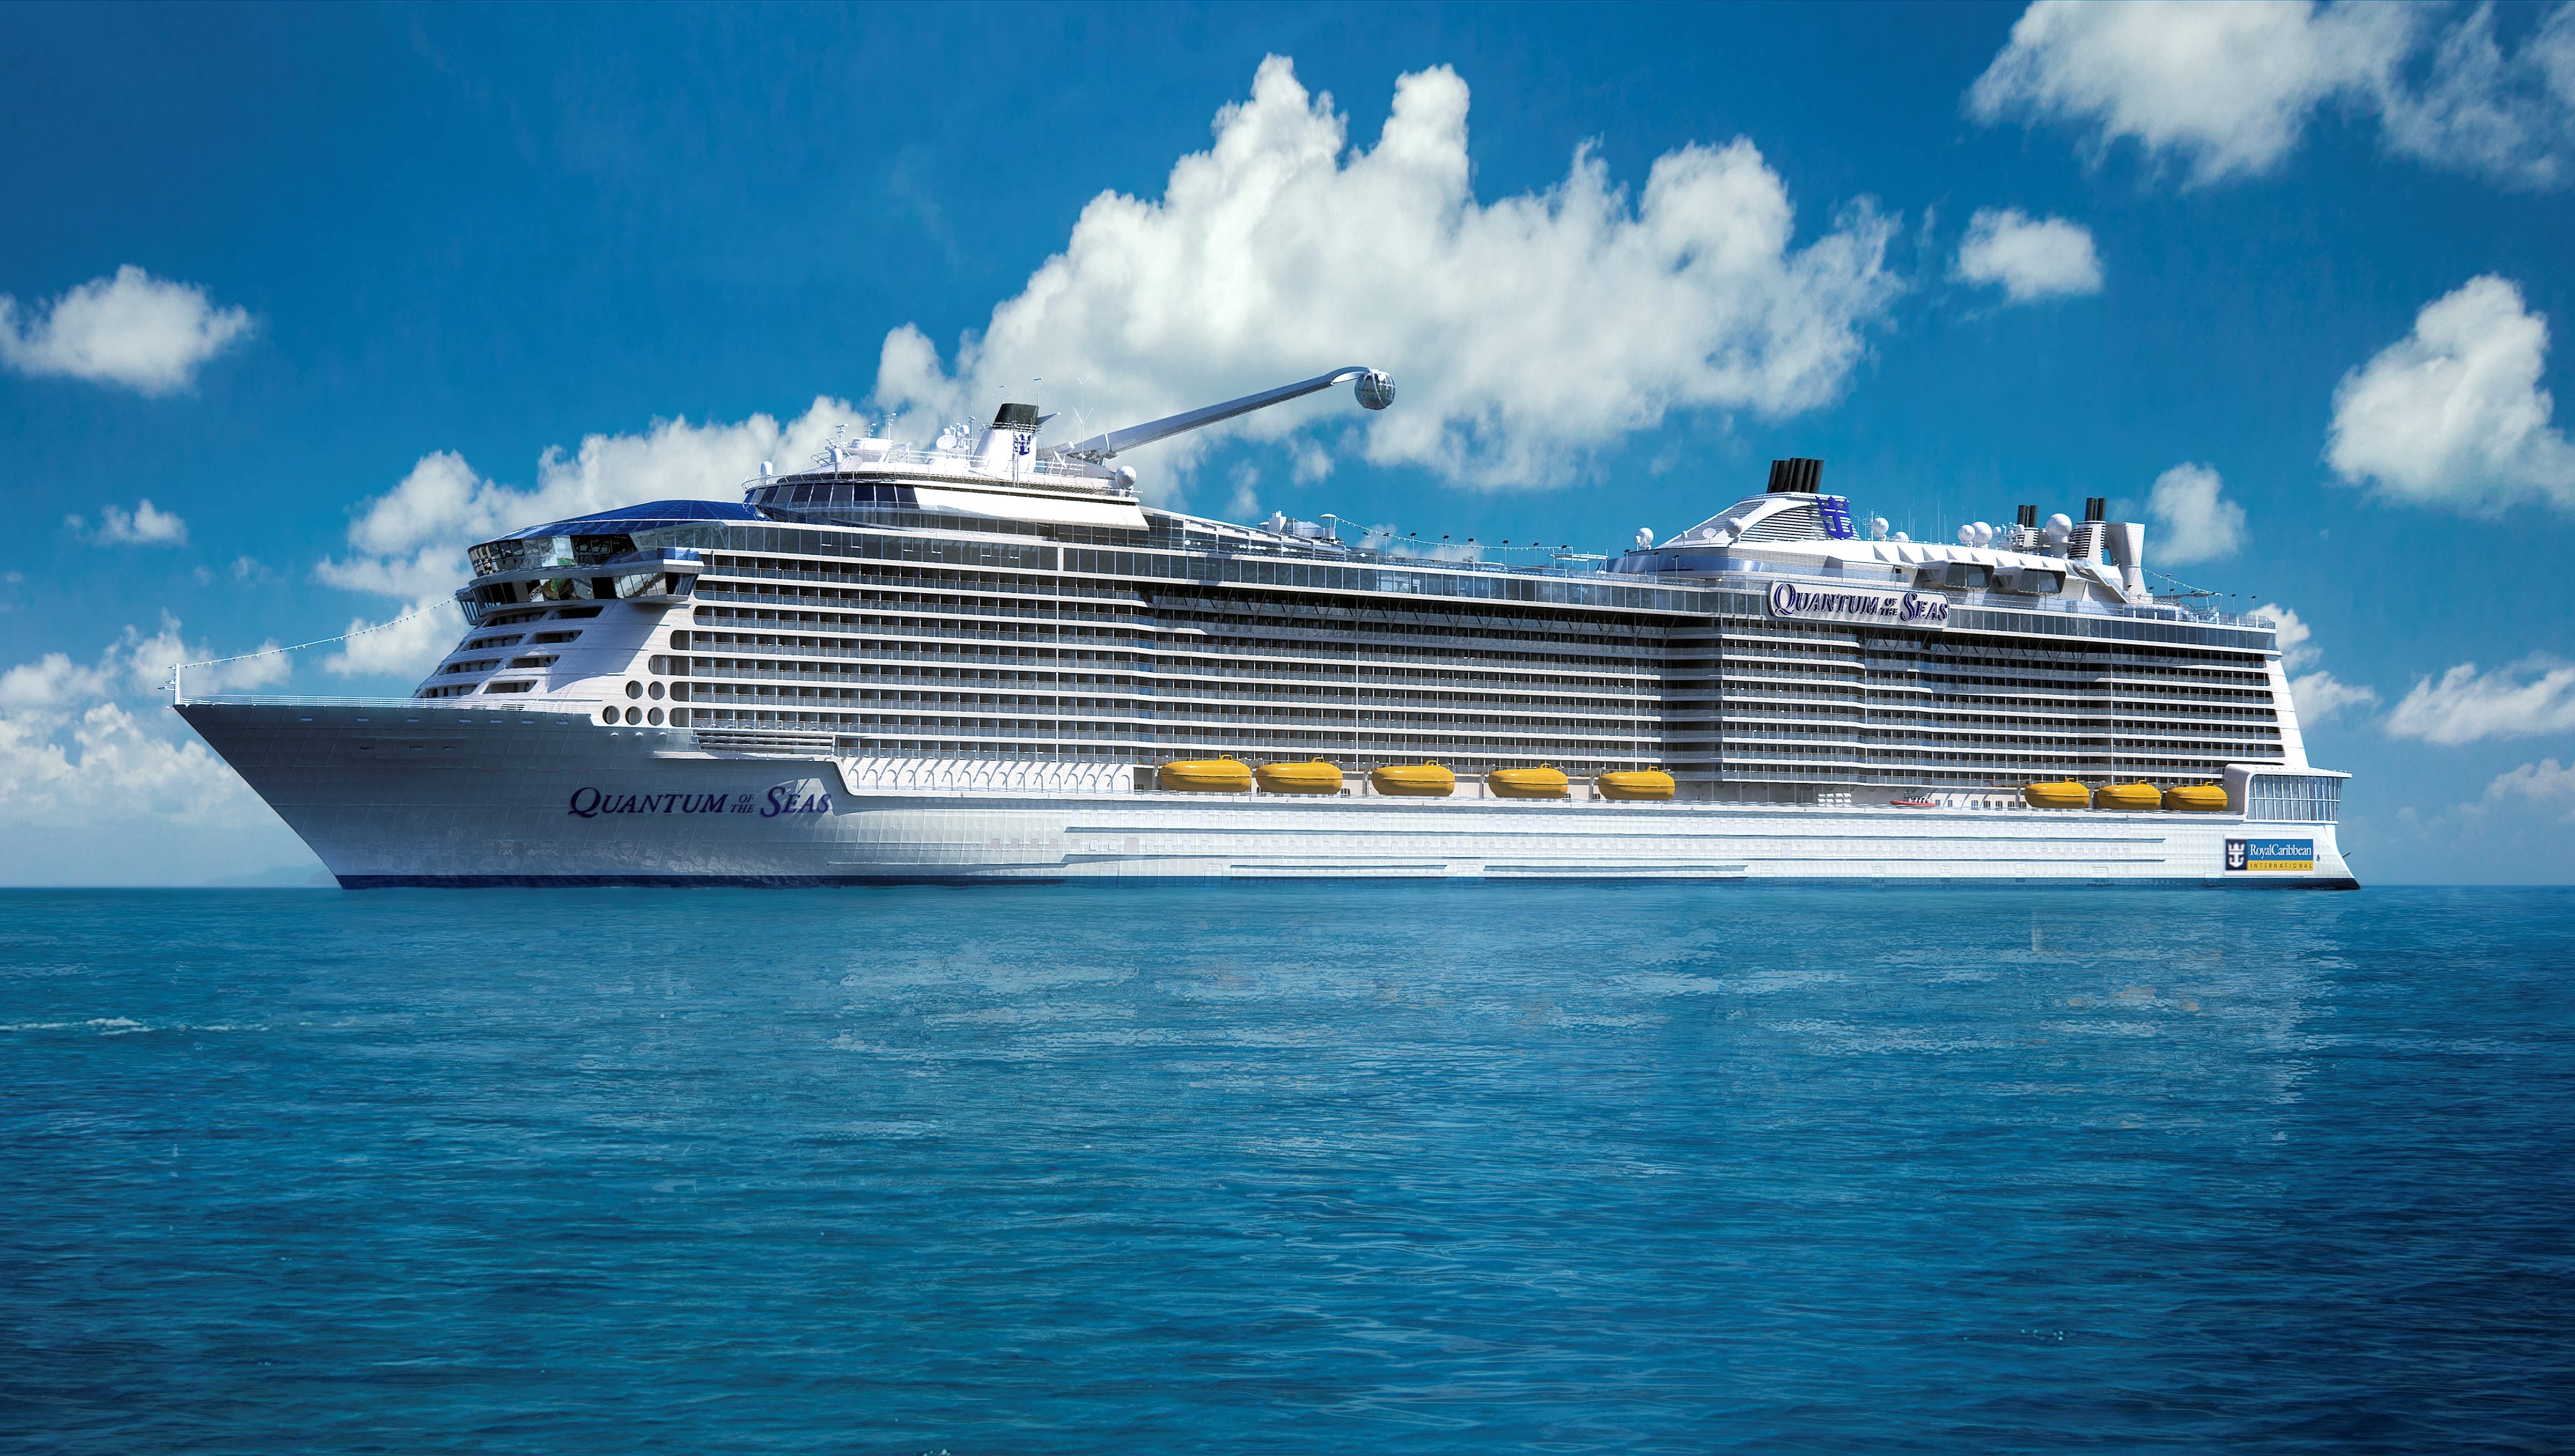 Download this When Royal Caribbean... picture